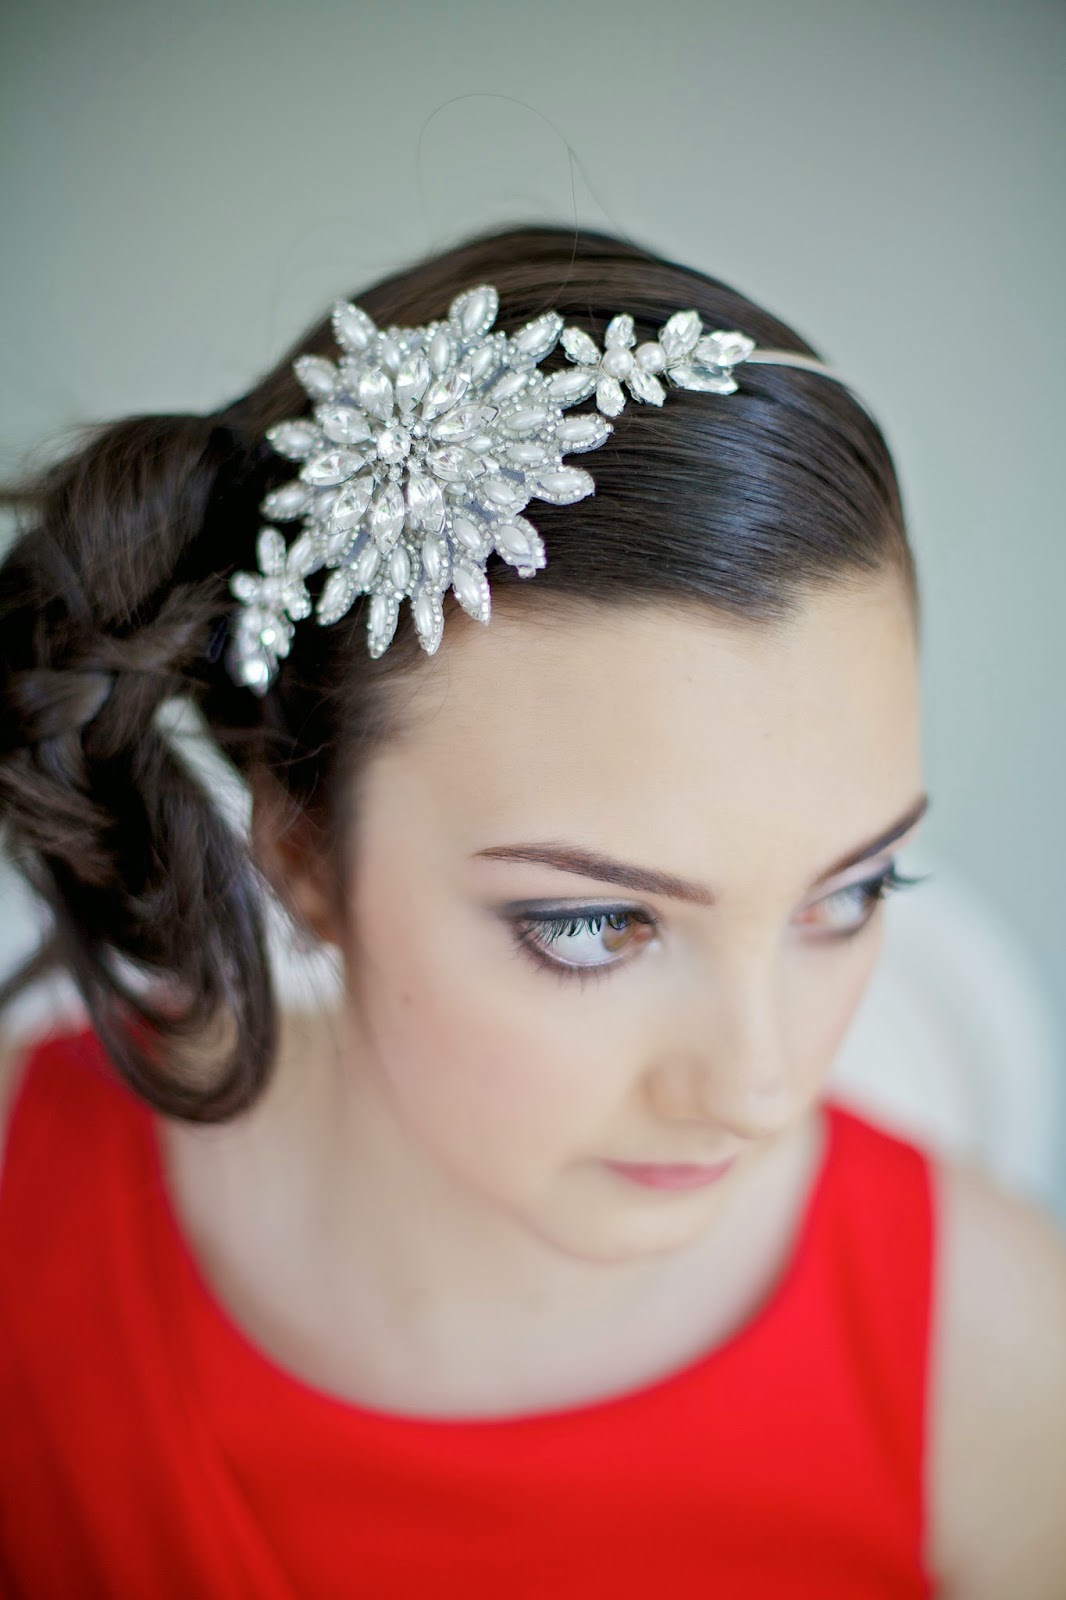 Bridal hair accessories 2014 side headband with white star and seed beads